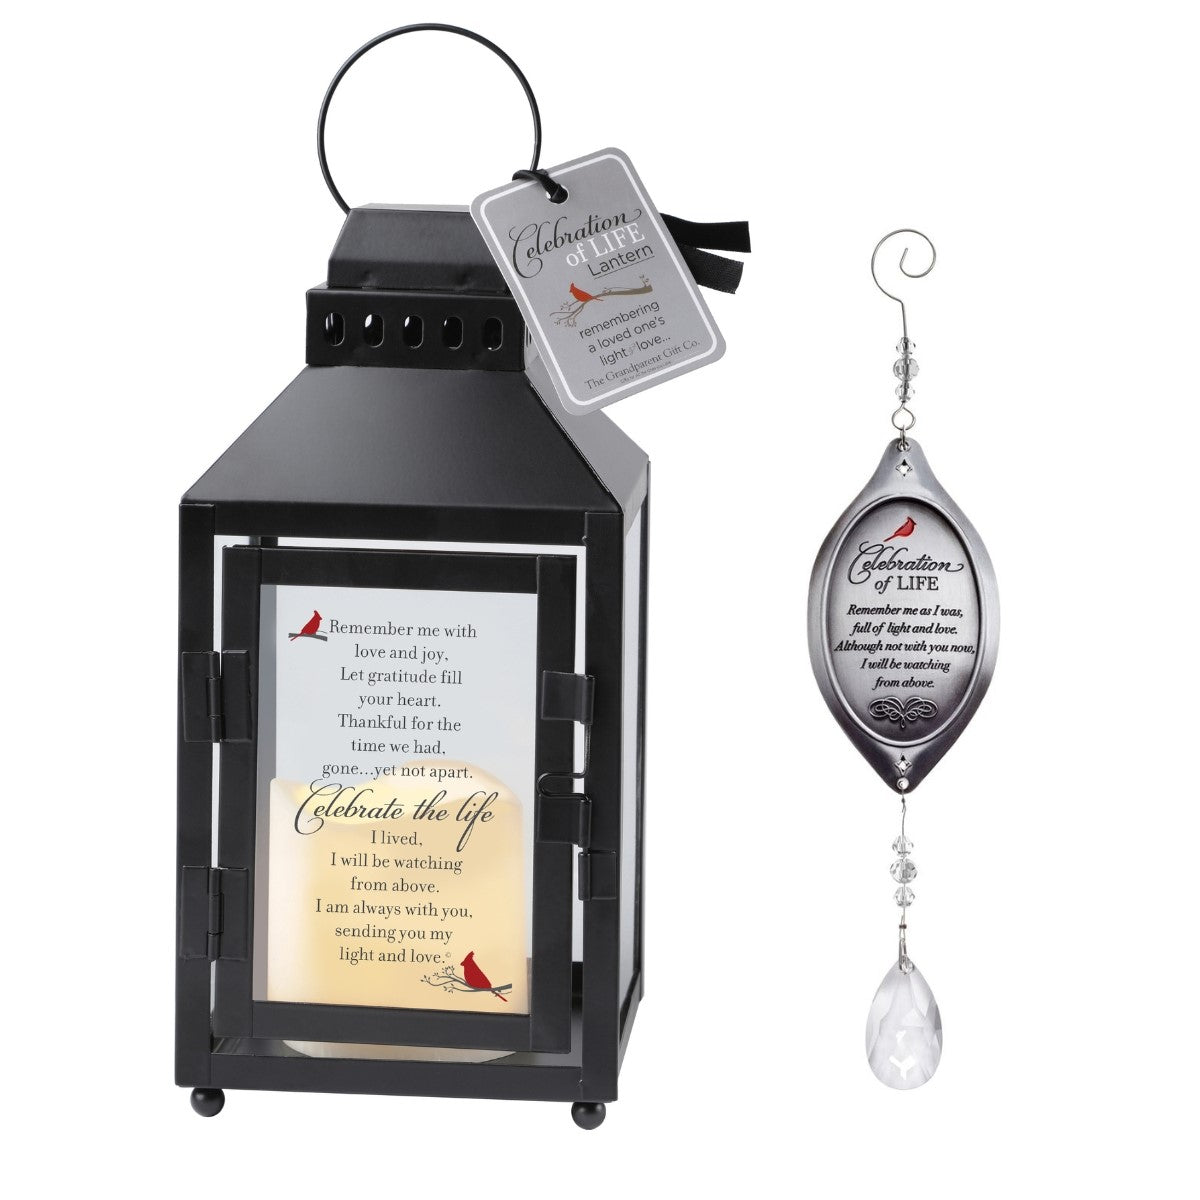 Celebration of Life Lantern and Memorial Ornament with Crystal